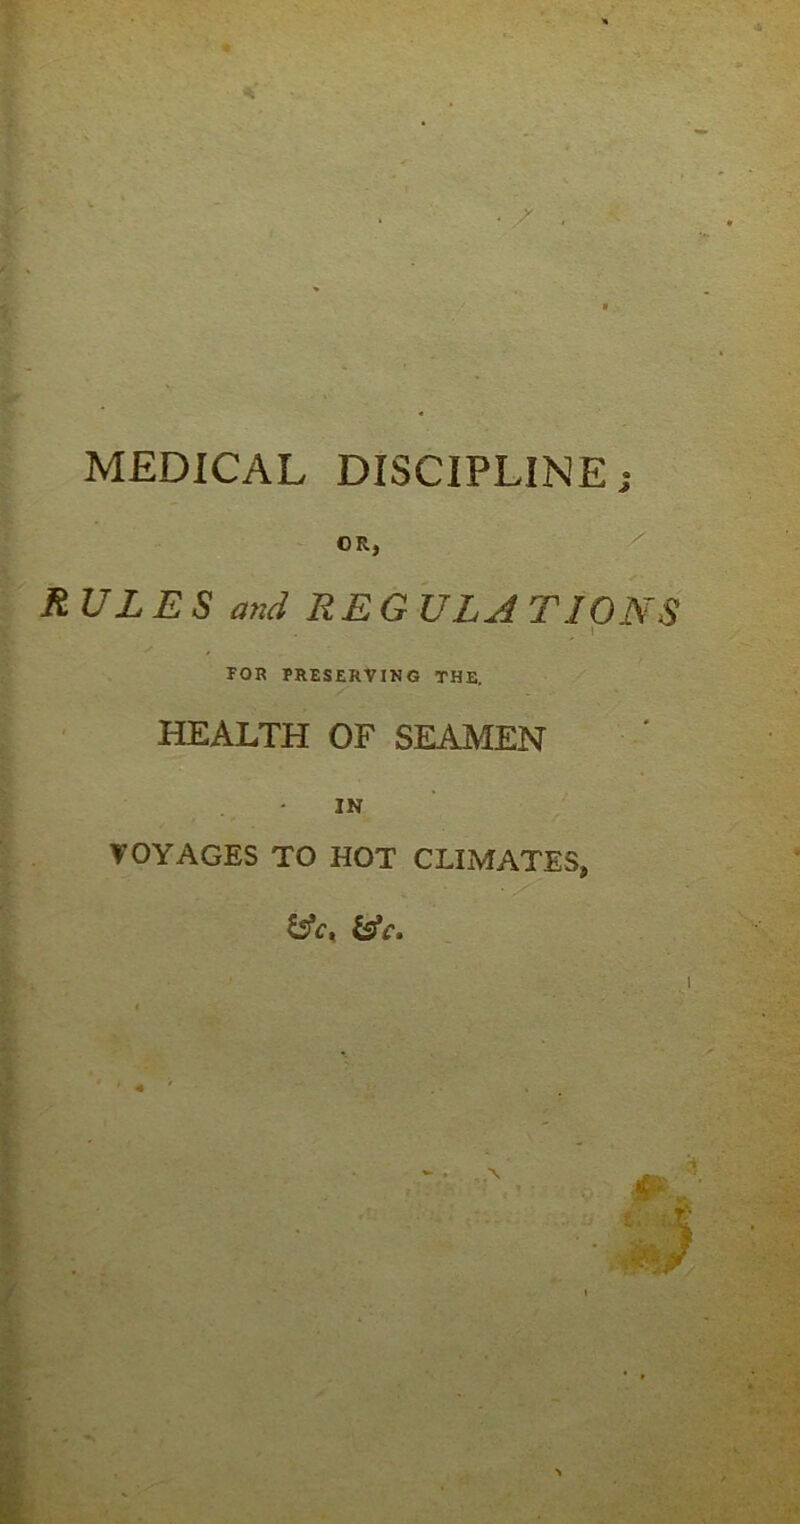 • /. MEDICAL DISCIPLINE % OR, RULES and REGULA TIONS t TOR PRESERVING THE. HEALTH OF SEAMEN IN VOYAGES TO HOT CLIMATES, &cK &c.